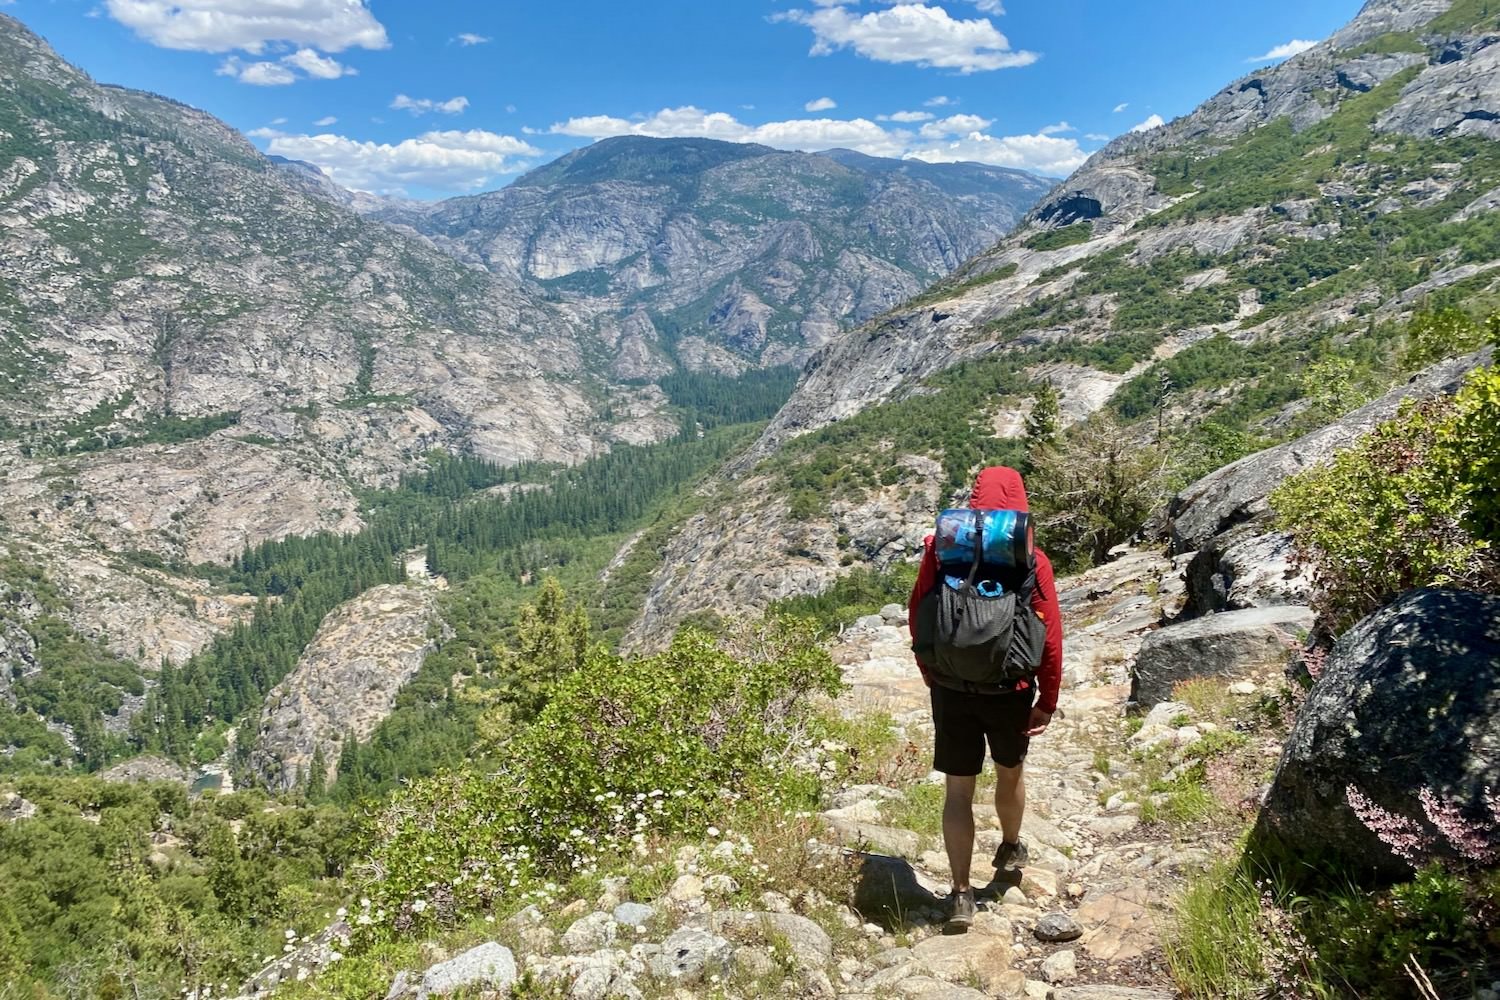 A hiker with a bear can strapped to their backpack walking down a mountain trail in Yosemite National Park